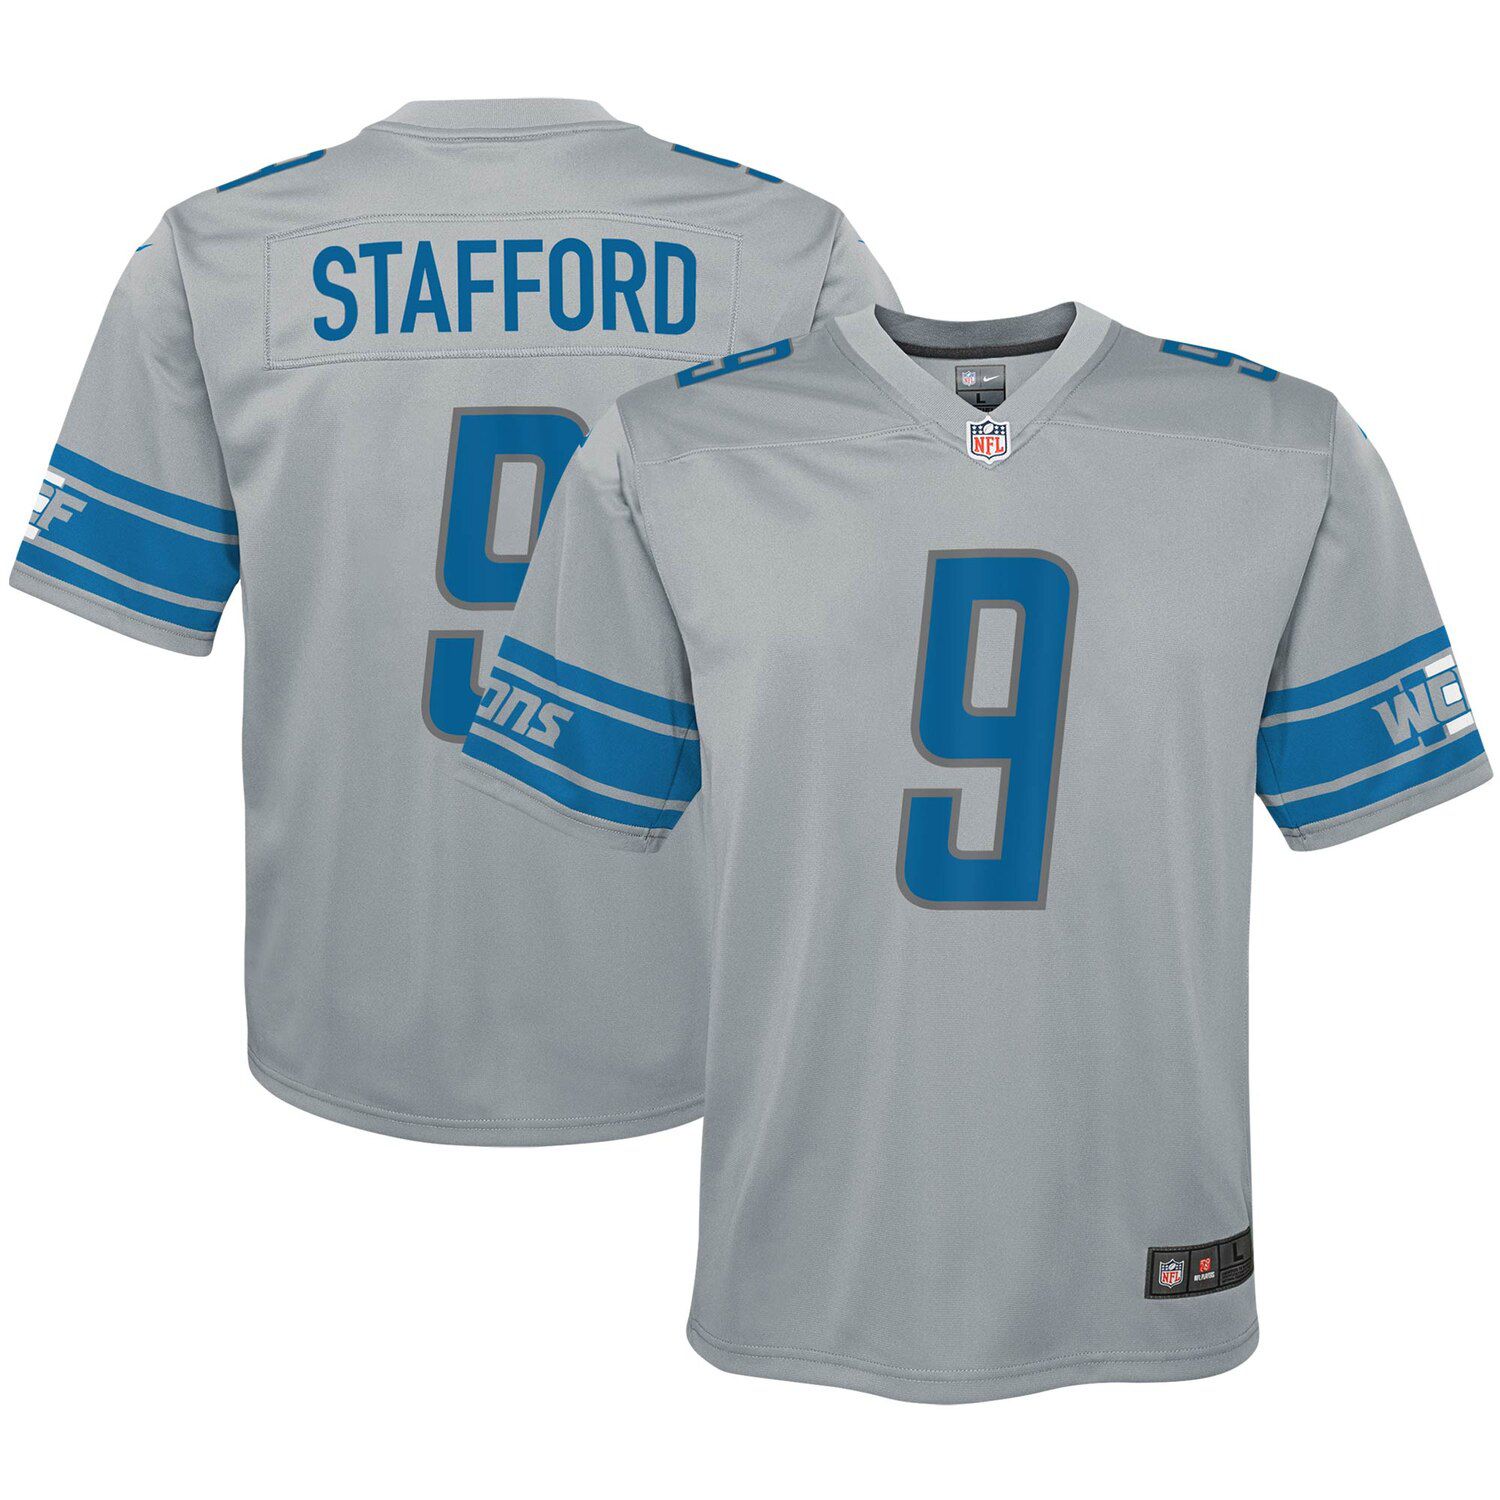 stafford youth jersey